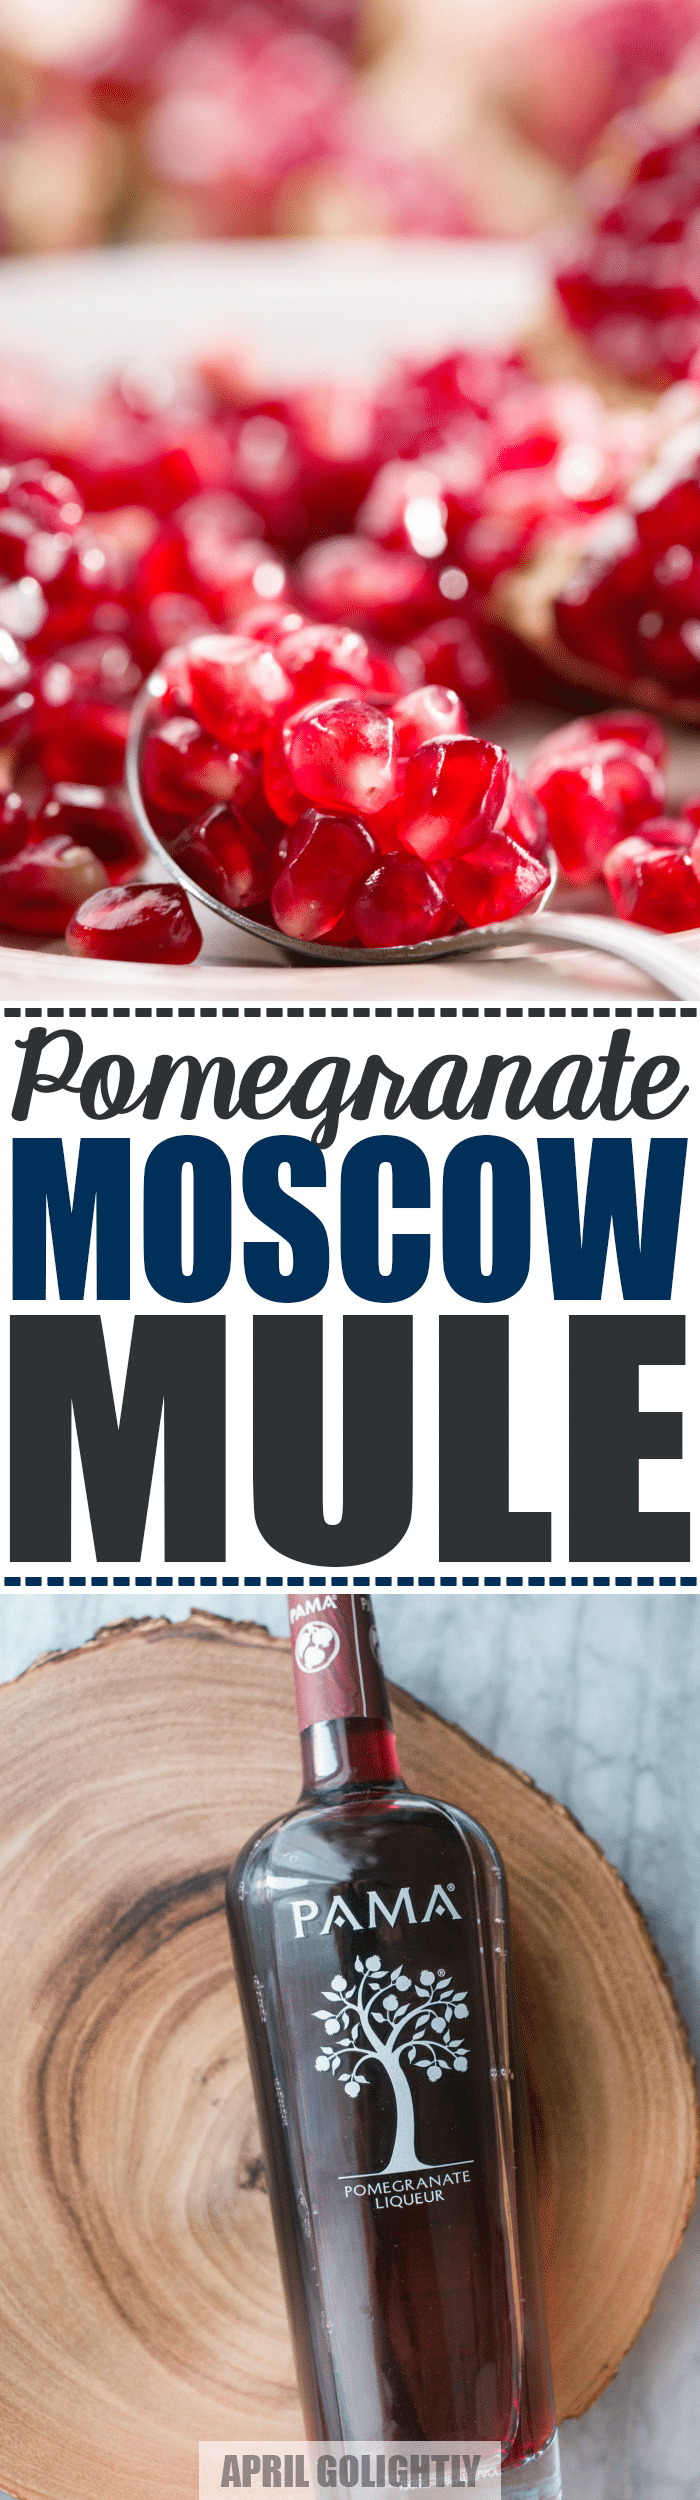 pomegranate-moscow-mule-with-pama